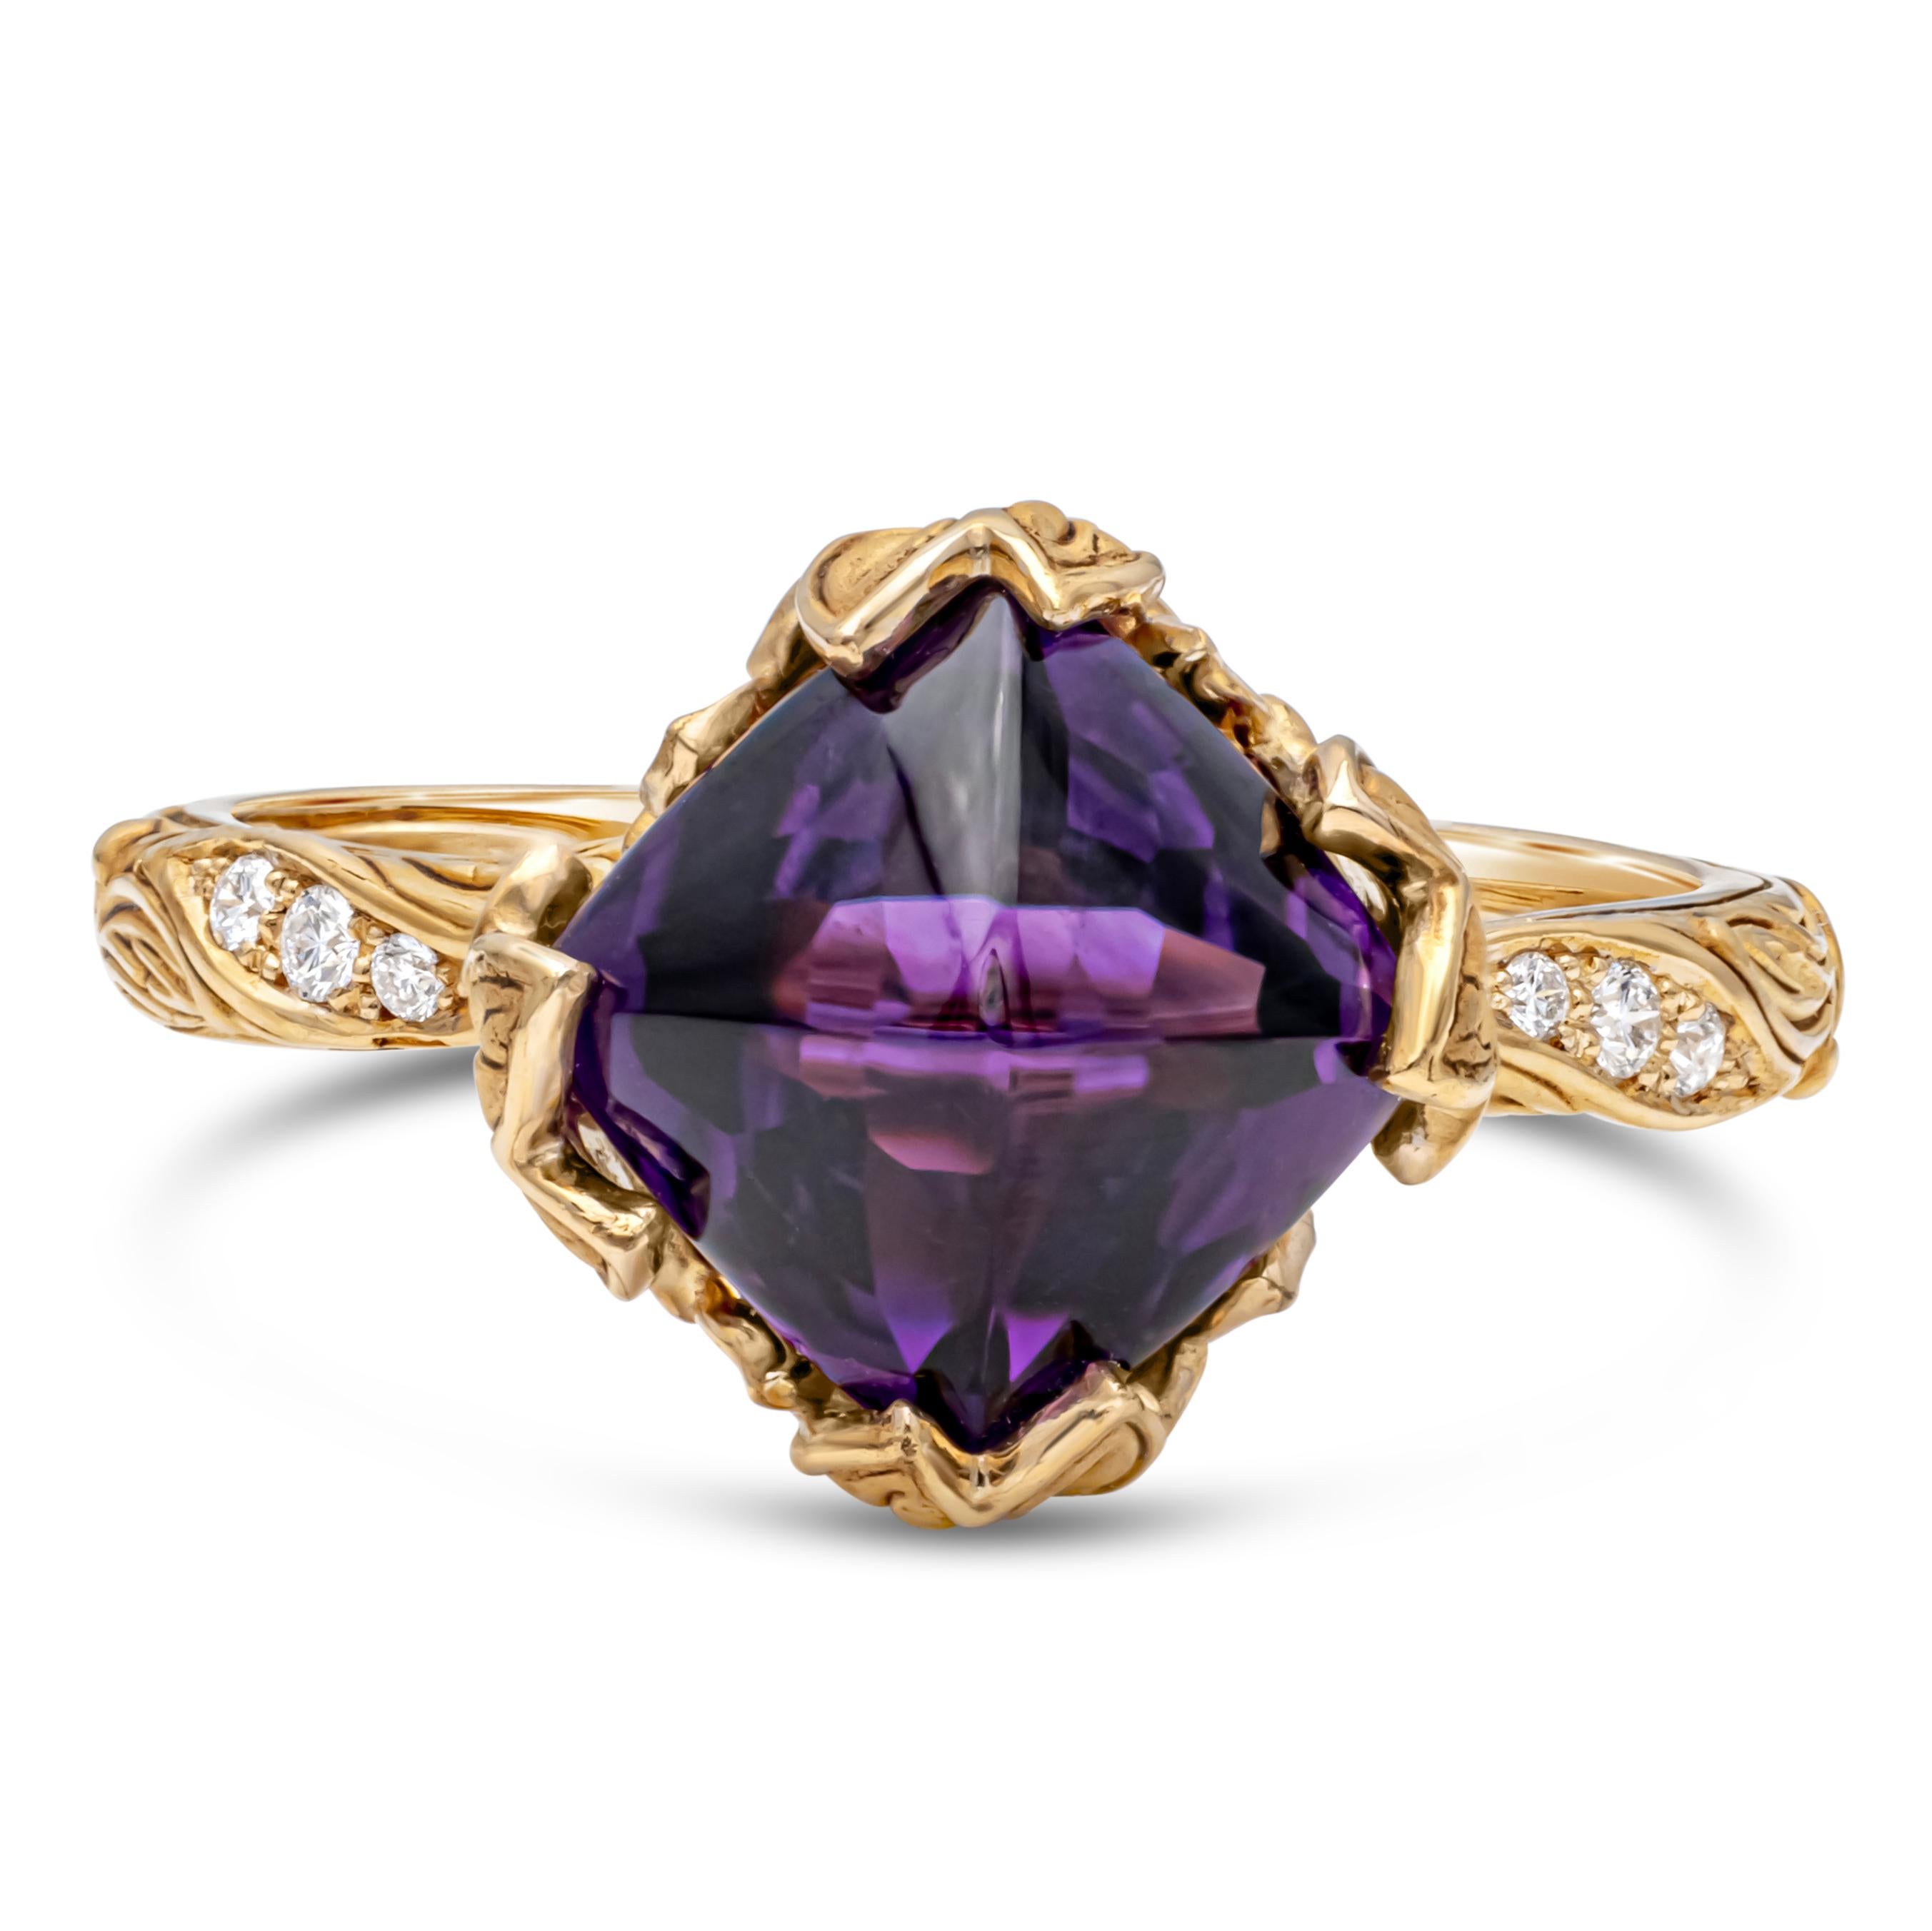 Signed by Carrera y Carrera, this elegant fashion lia ring with 2.77 carats sugarloaf amethyst and 0.04 diamond is made in 18k Yellow Gold. Perfect for special occasion or a gift for loved one.

Roman Malakov Diamonds is an authorized dealer of